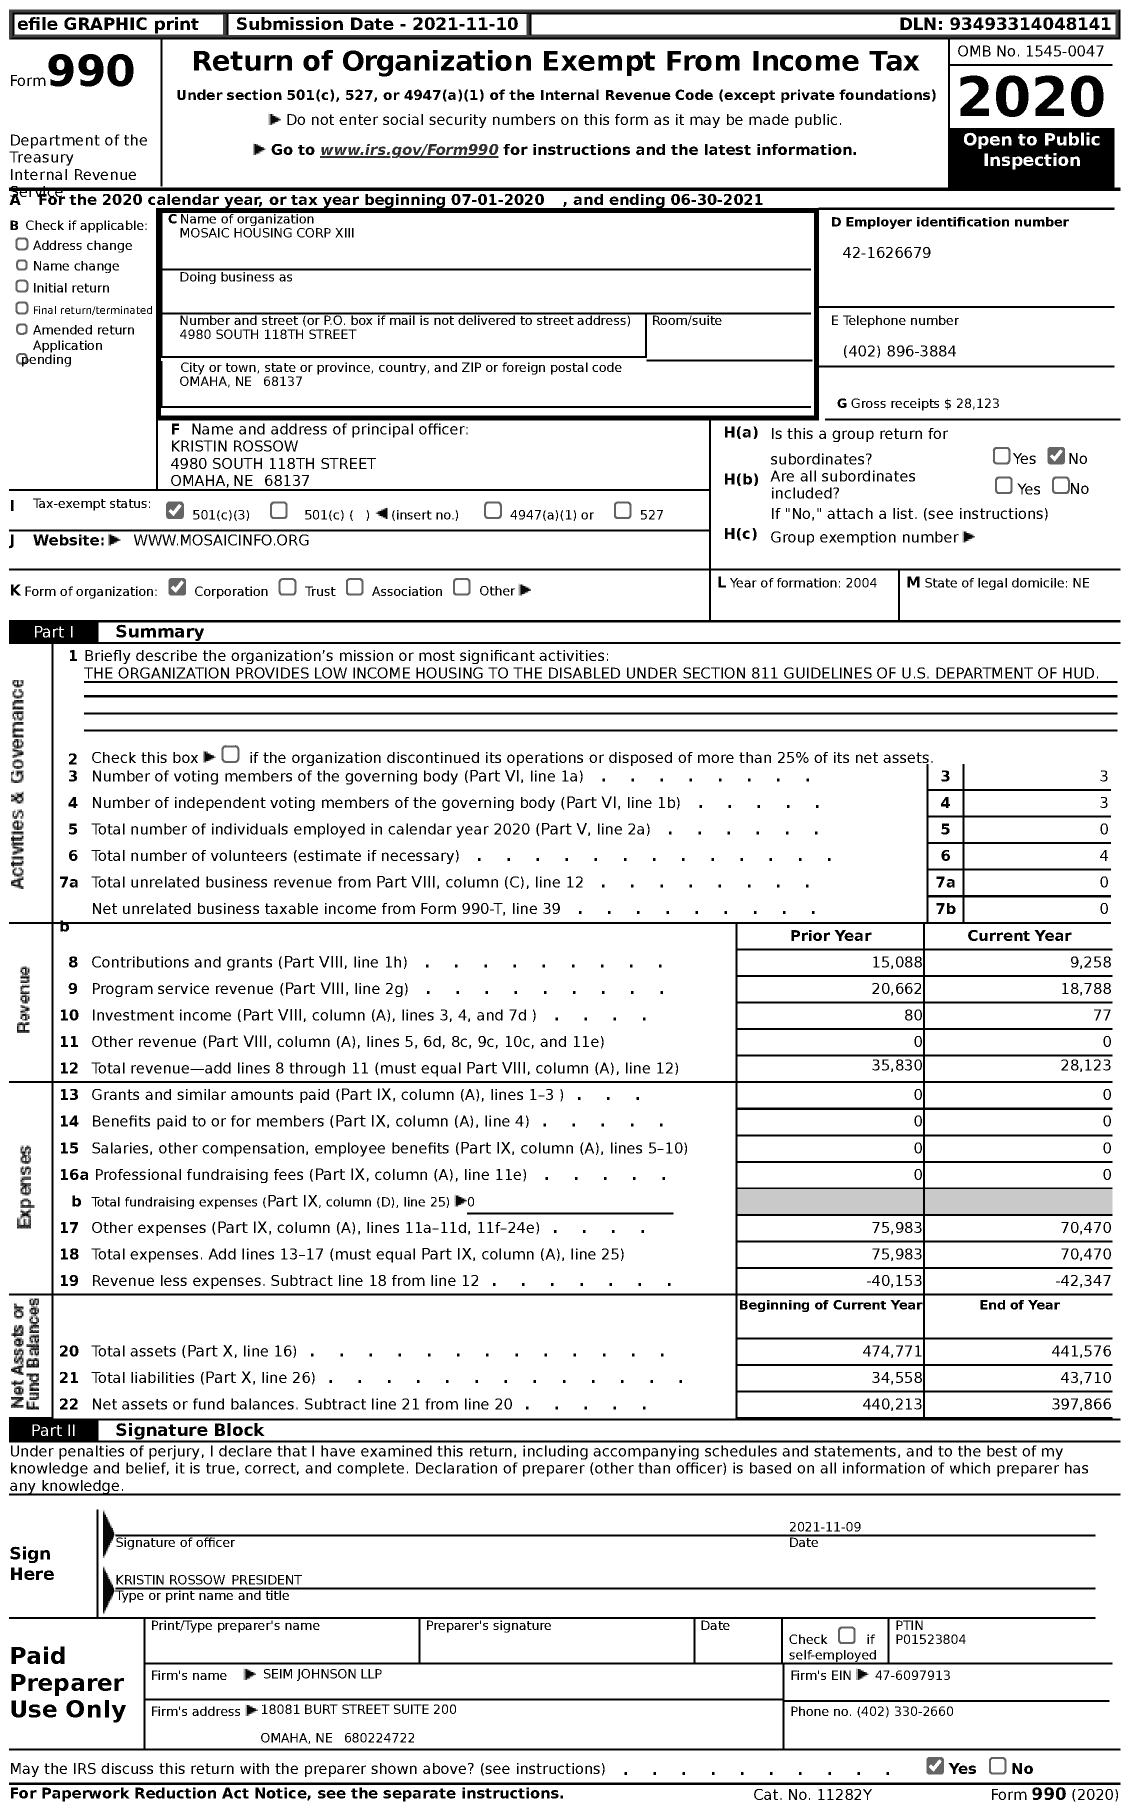 Image of first page of 2020 Form 990 for Mosaic Housing Corporation Xiii